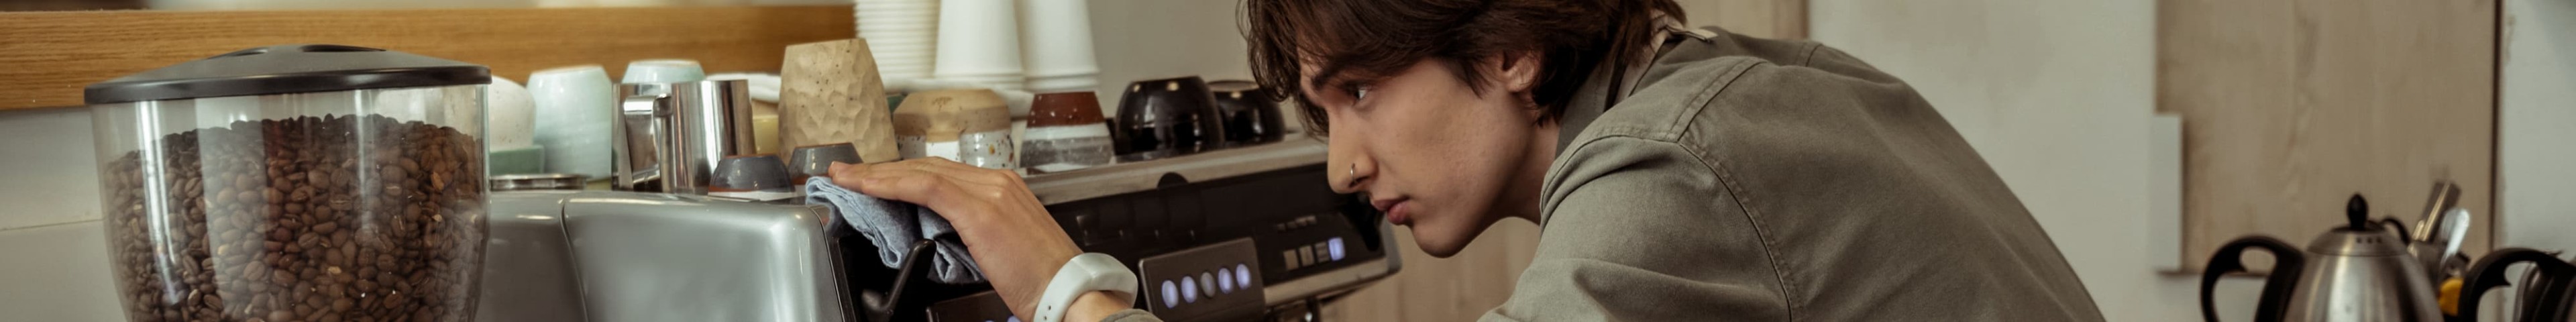 Image of a teen boy working as a barista.